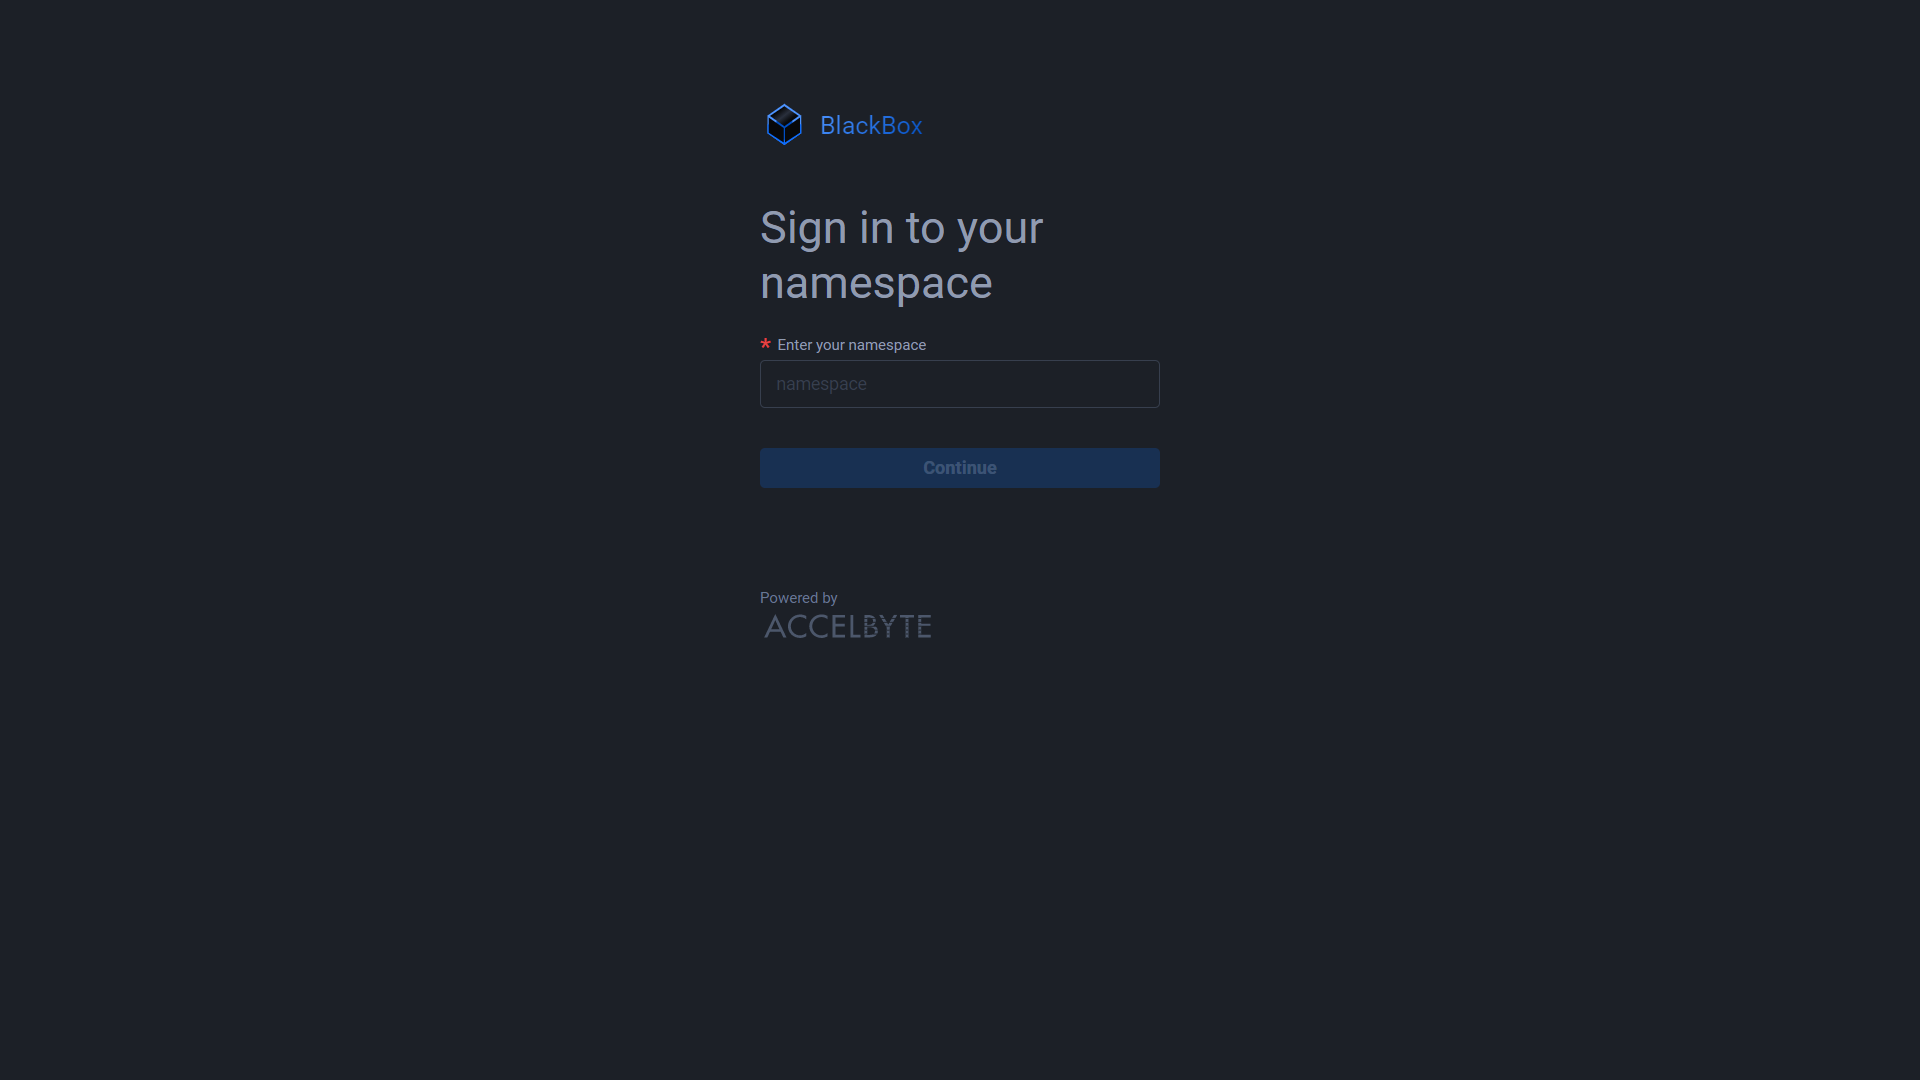 Sign in to your namespace panel